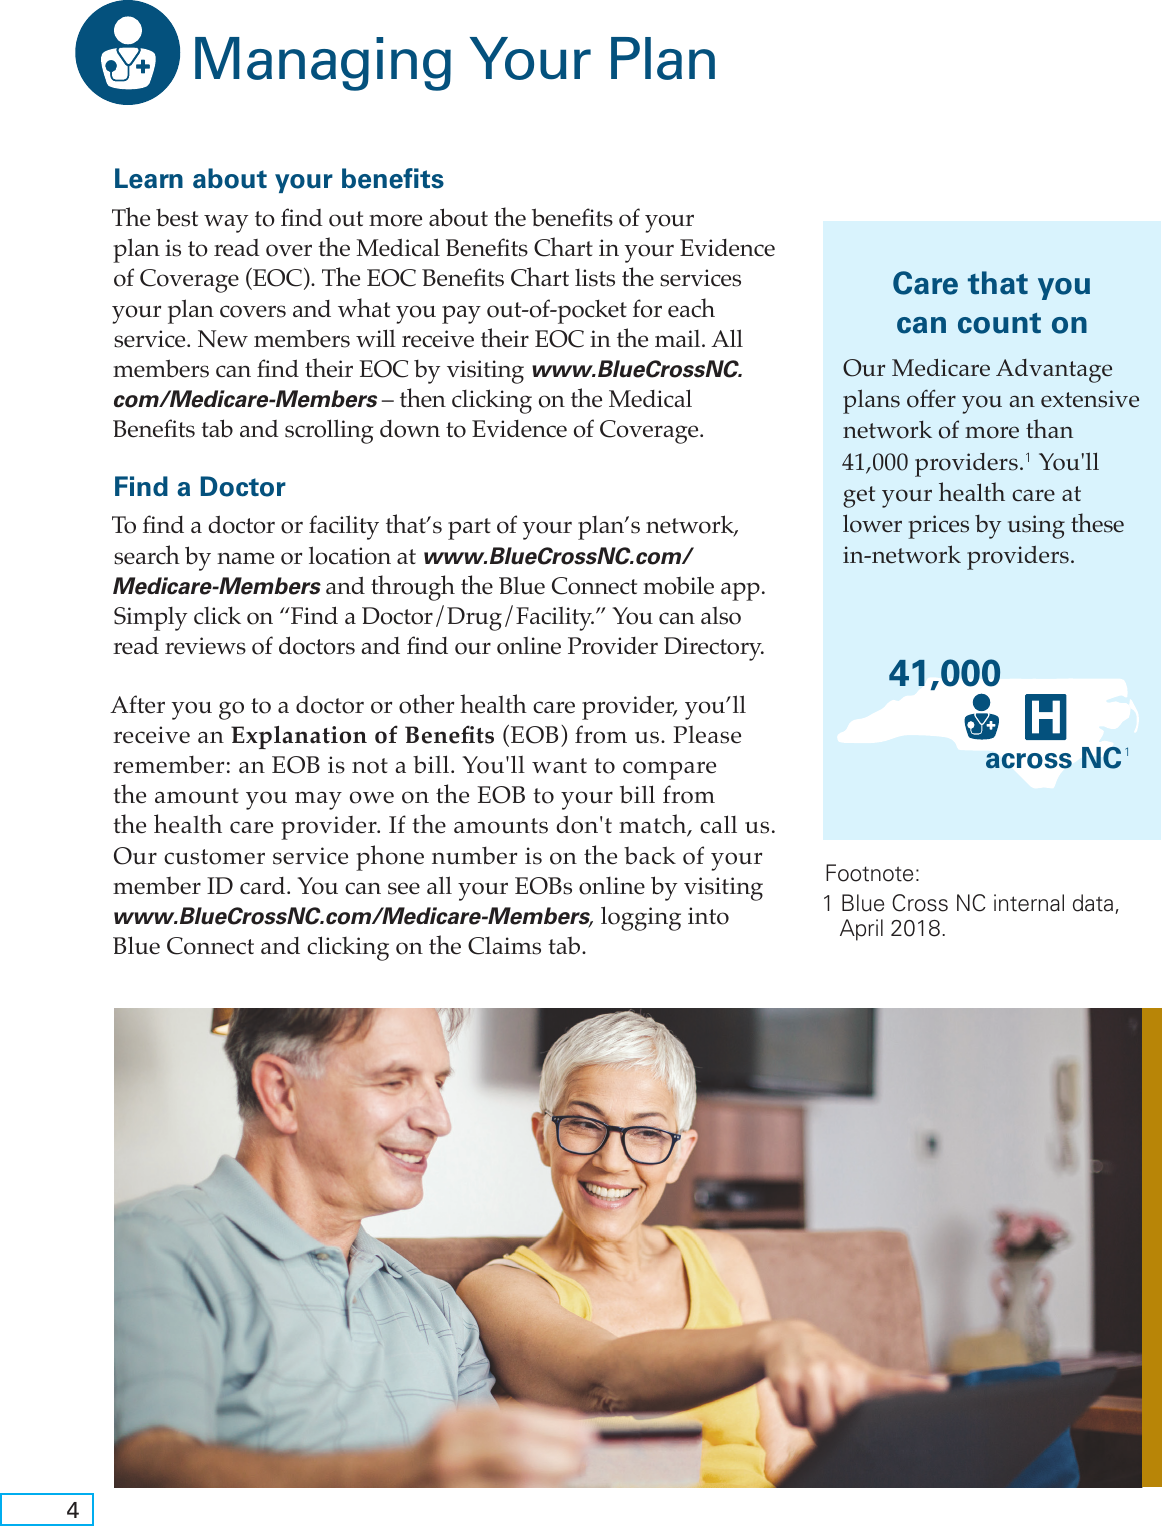 Page 4 of 8 - U14314-2018-Medicare-Advantage-Onboarding-Guide-r001